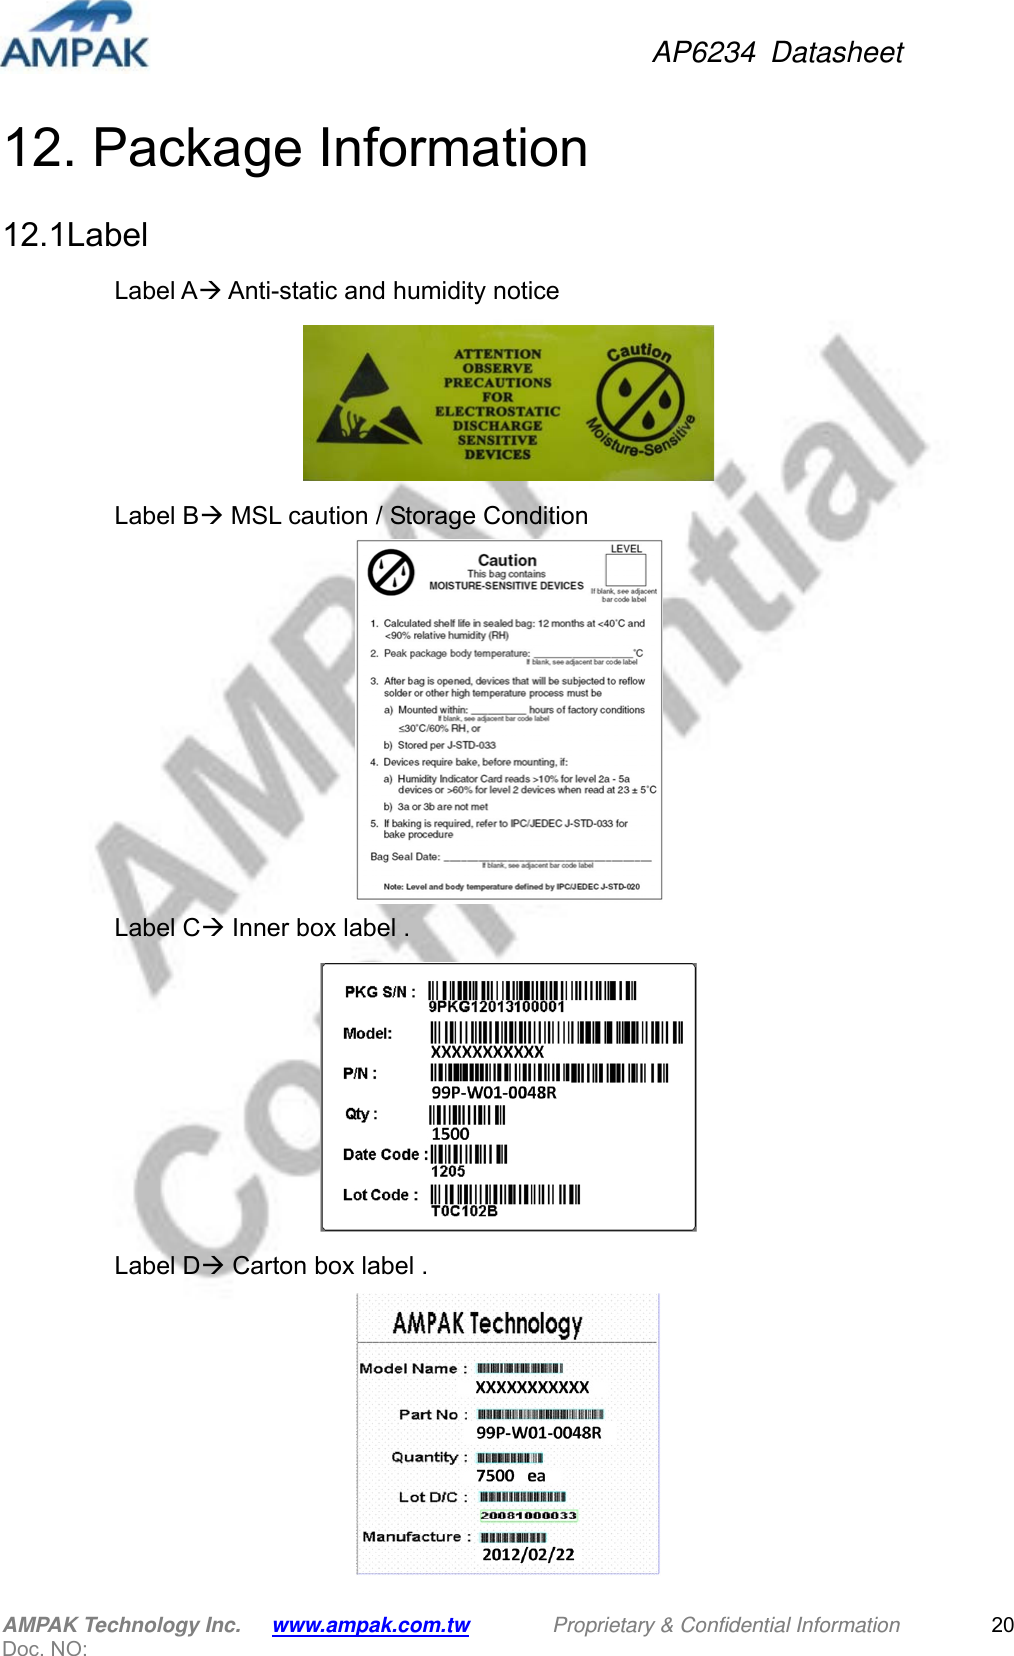 AP6234 Datasheet AMPAK Technology Inc.      www.ampak.com.tw        Proprietary &amp; Confidential Information       Doc. NO:   2012. Package Information 12.1Label  Label A Anti-static and humidity notice  Label B MSL caution / Storage Condition  Label C Inner box label .  Label D Carton box label .                                           